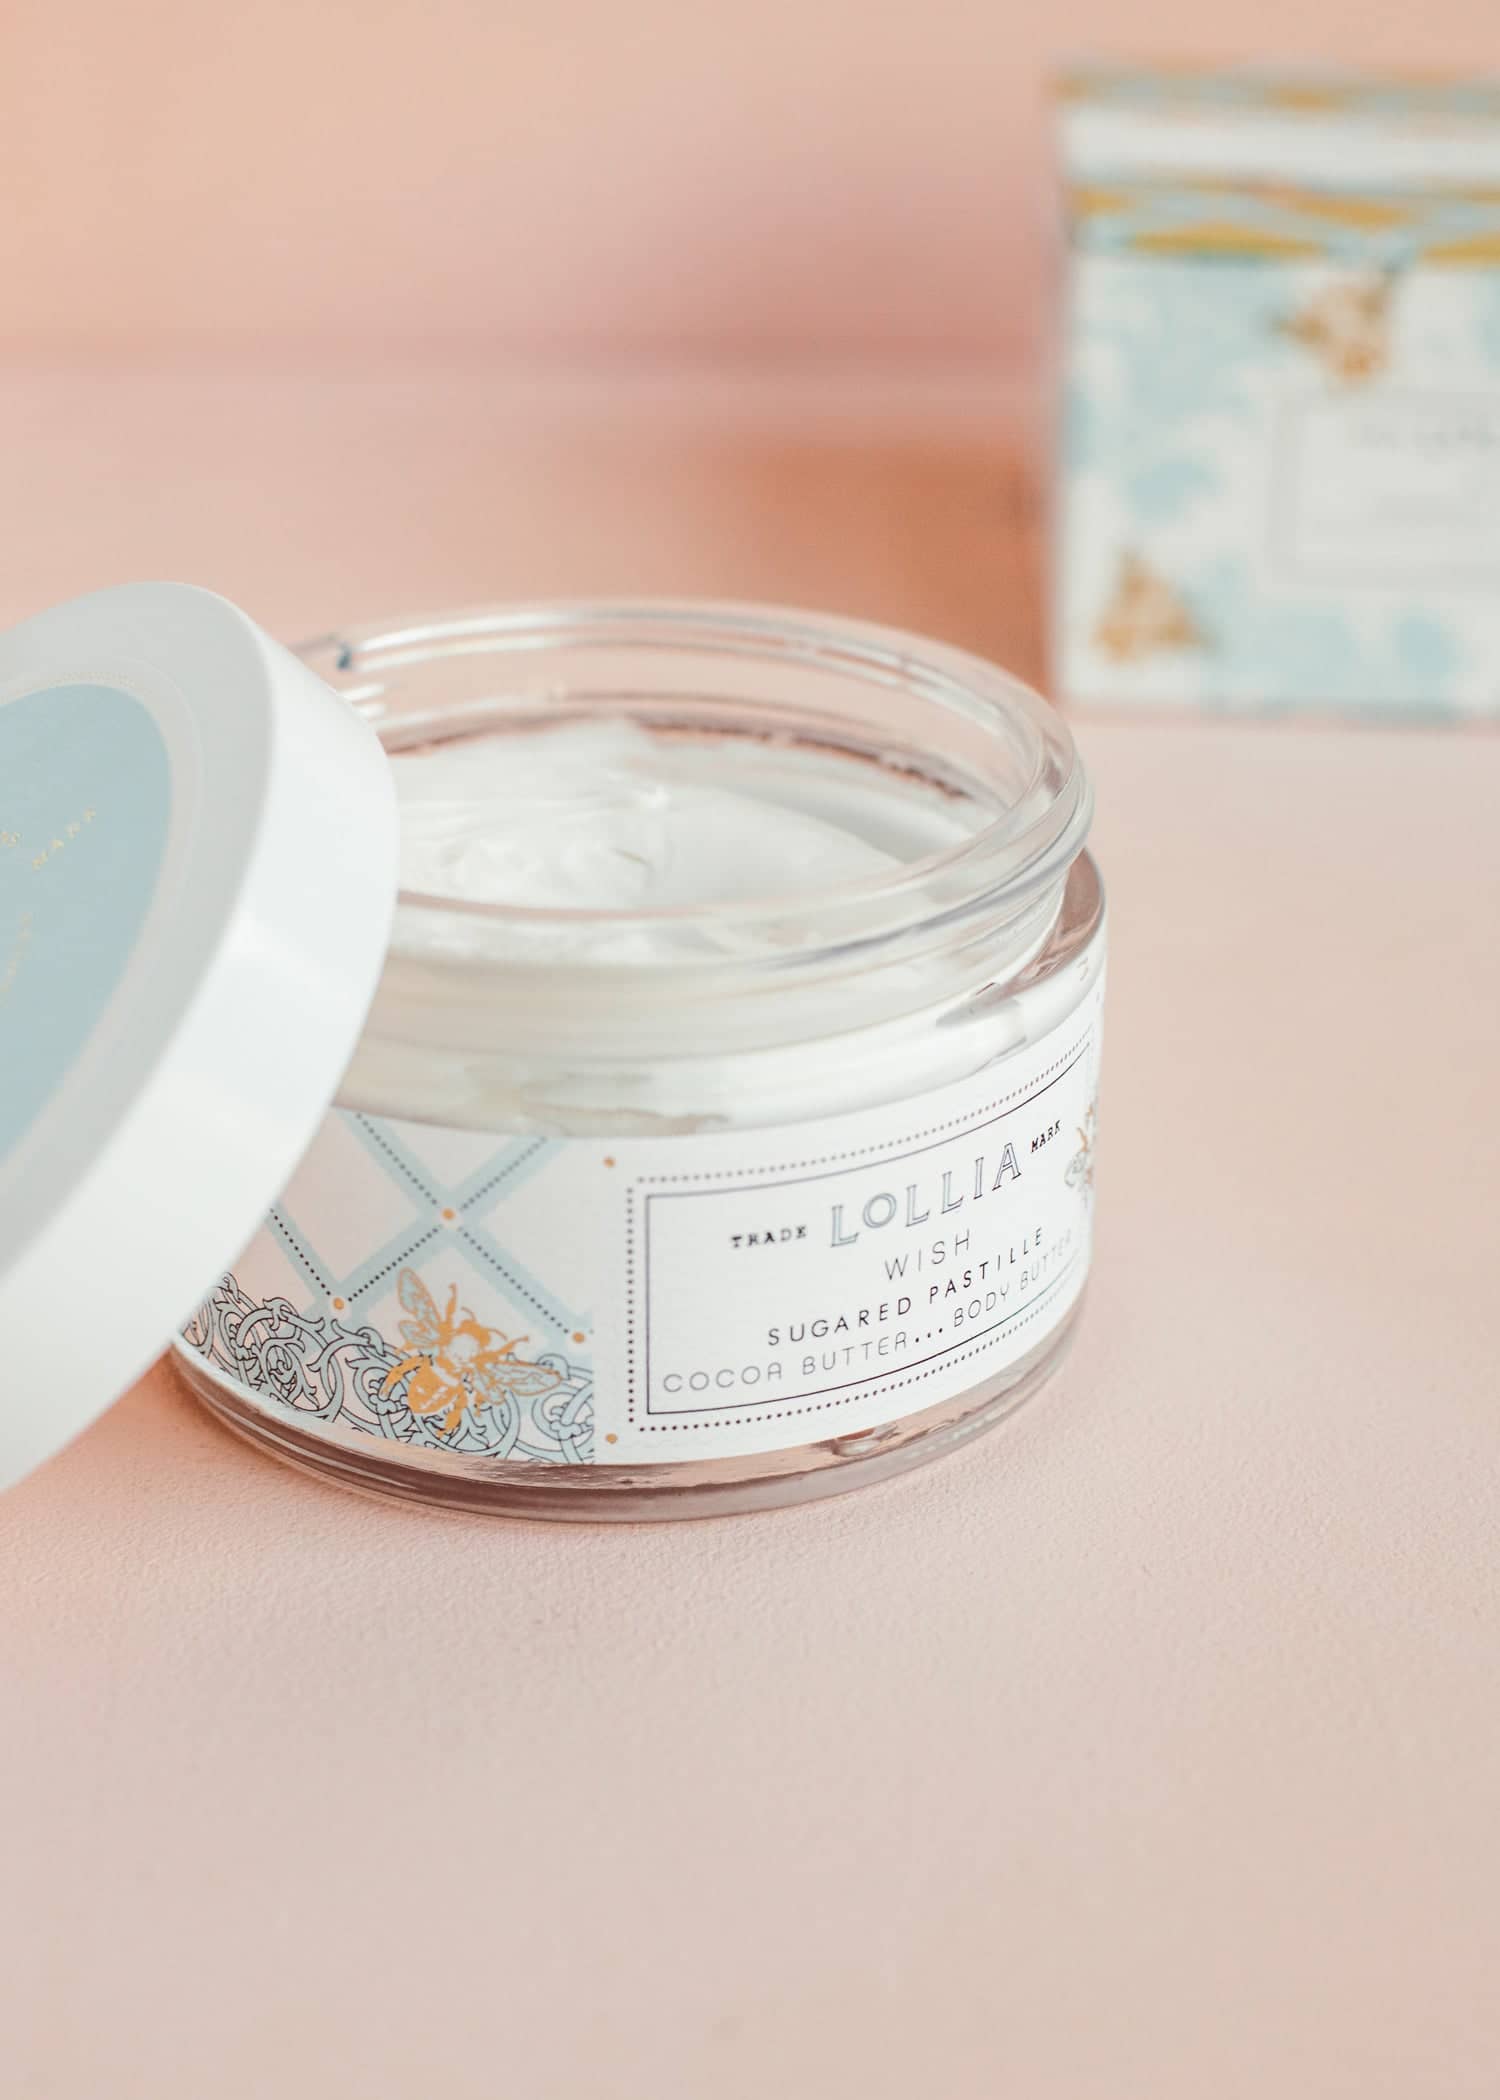 Lollia Whipped Body Butter